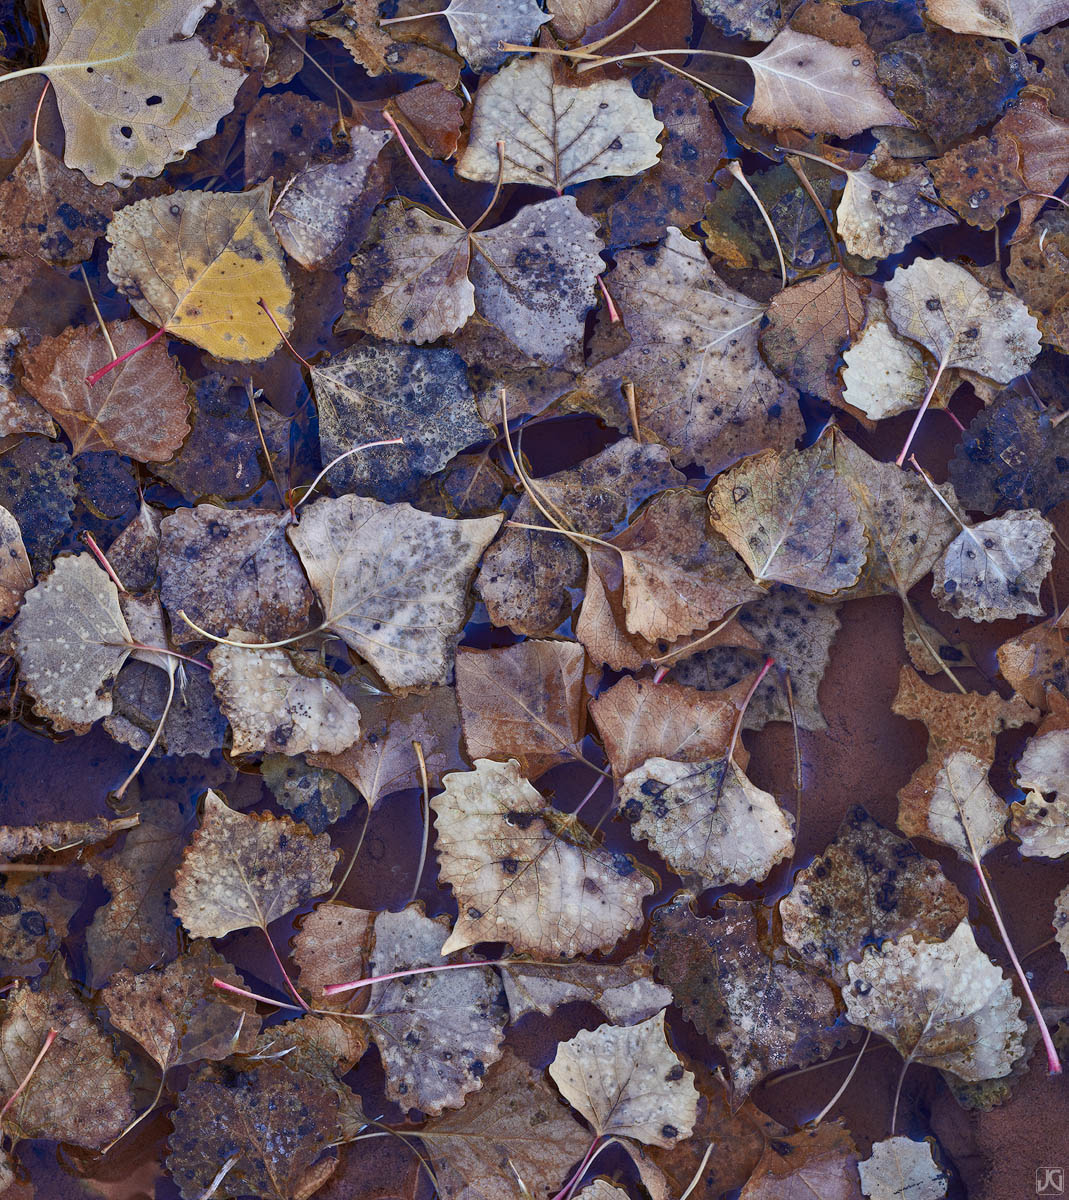 A small pool of decaying autumn leaves along the edge of a small creek reflect the small bit of blue sky remaining above.